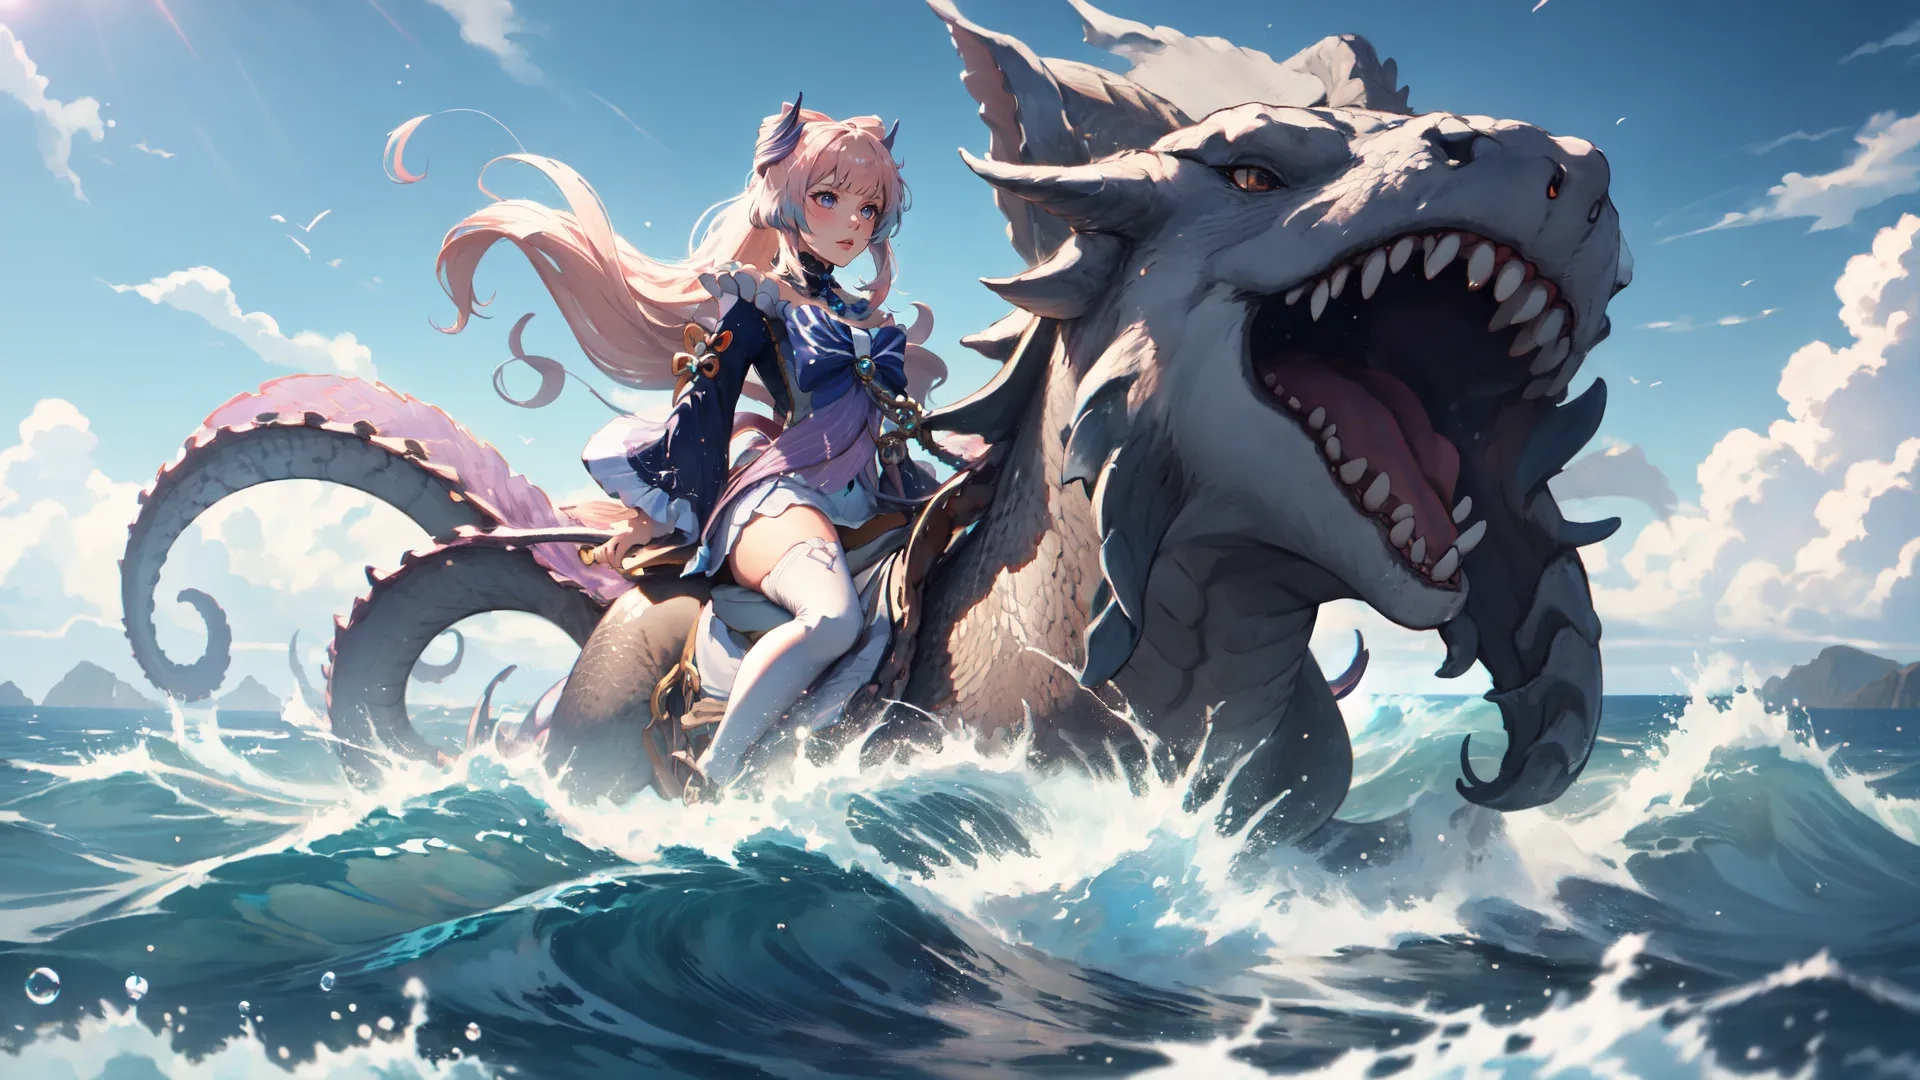 anime girl riding on a creature with big jaws on water surface outside, surrounded by clouds and a lot of sun rays while the sun shines
